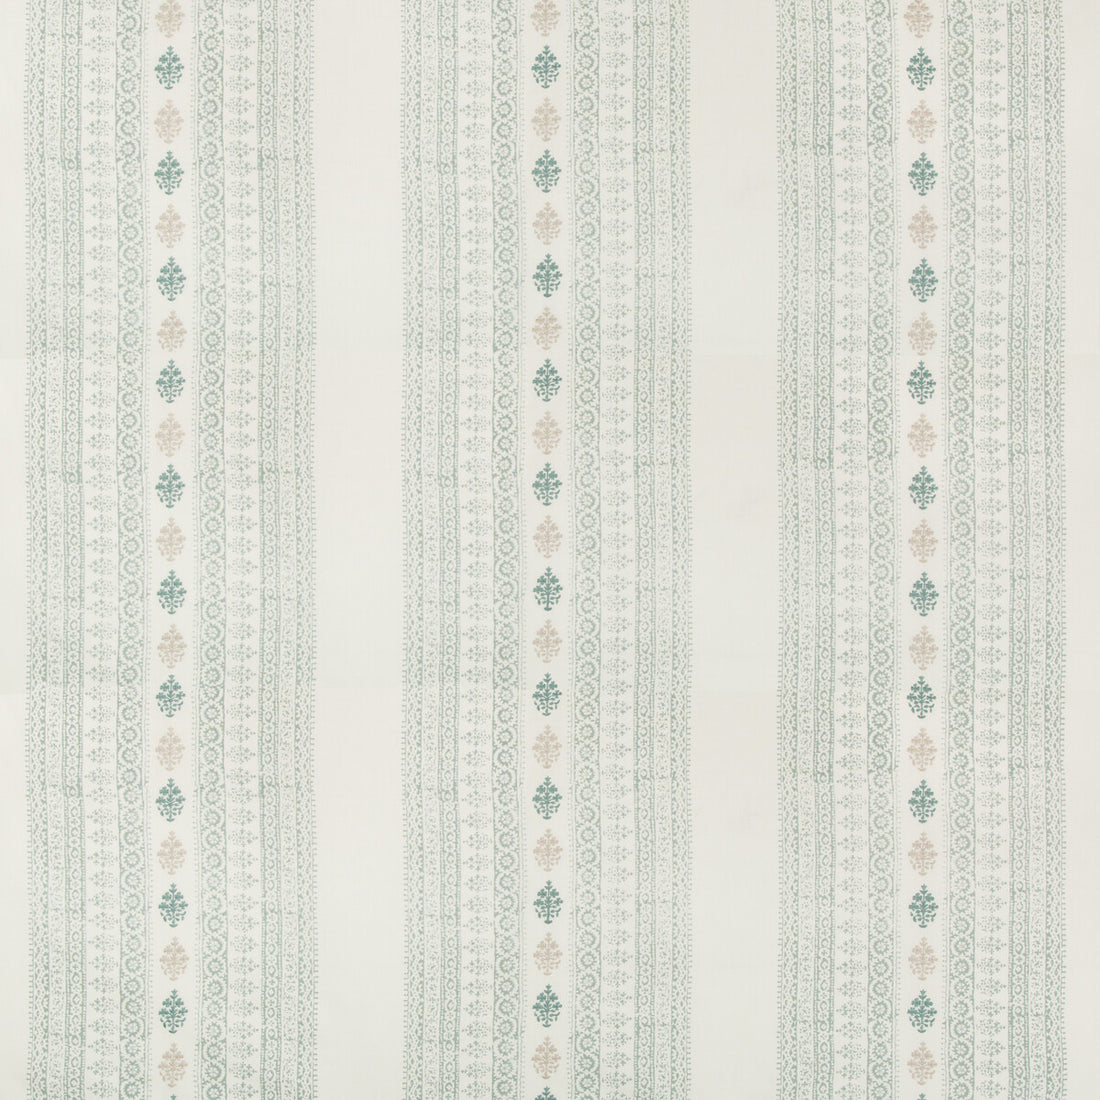 Seacliffe Print fabric in mist color - pattern 2017168.123.0 - by Lee Jofa in the Westport collection